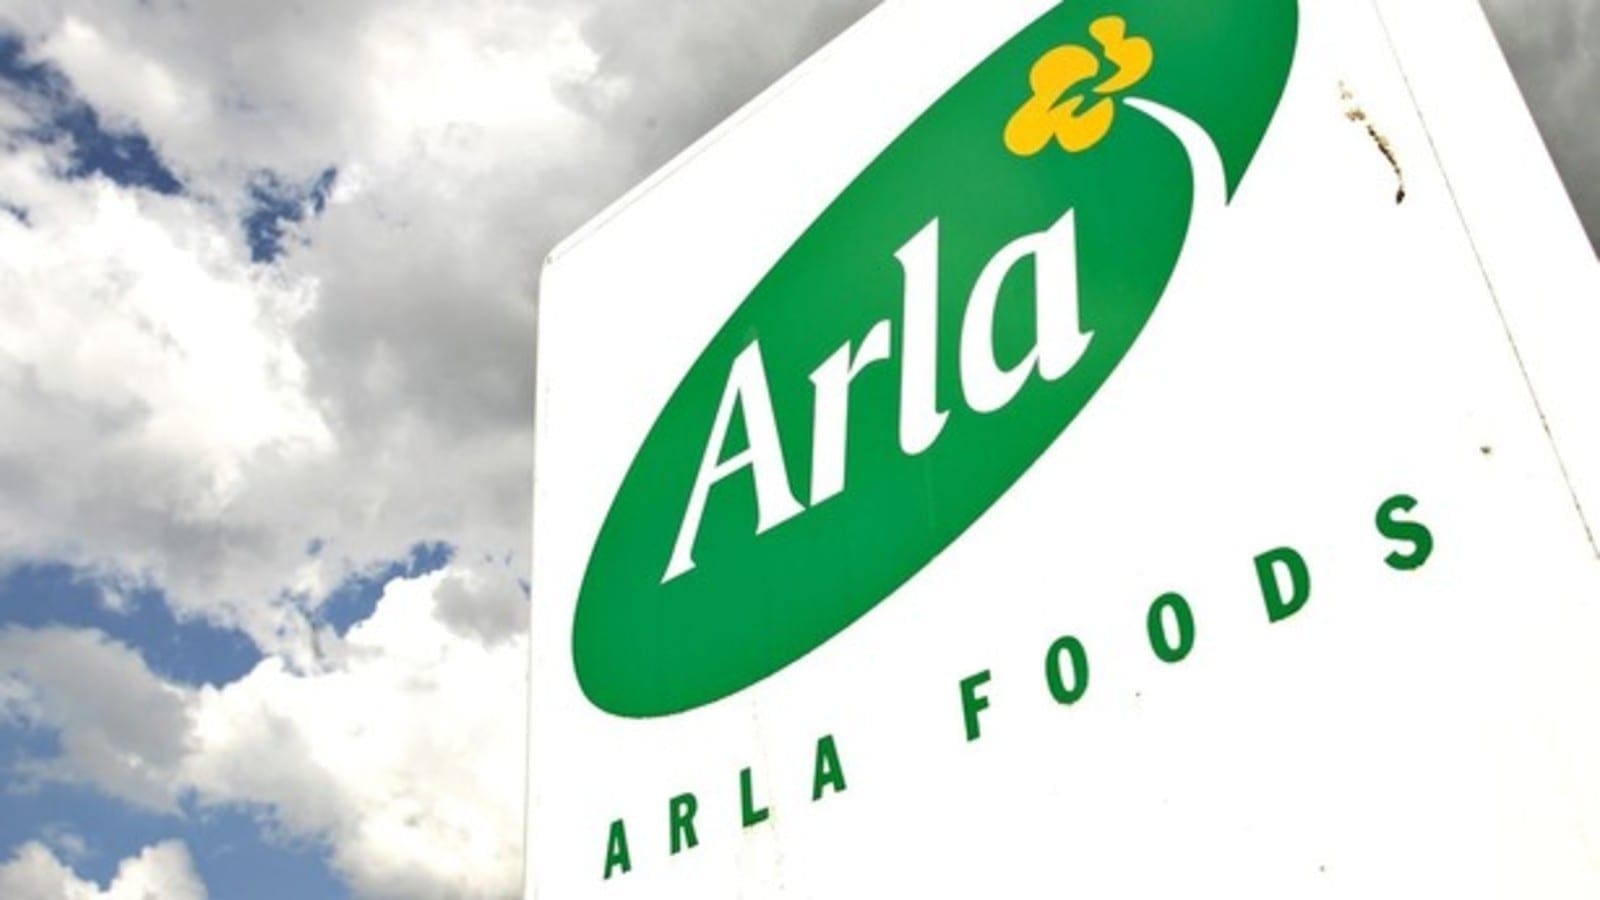 Arla Foods records impressive H1 results, raises full year guidance despite higher input costs